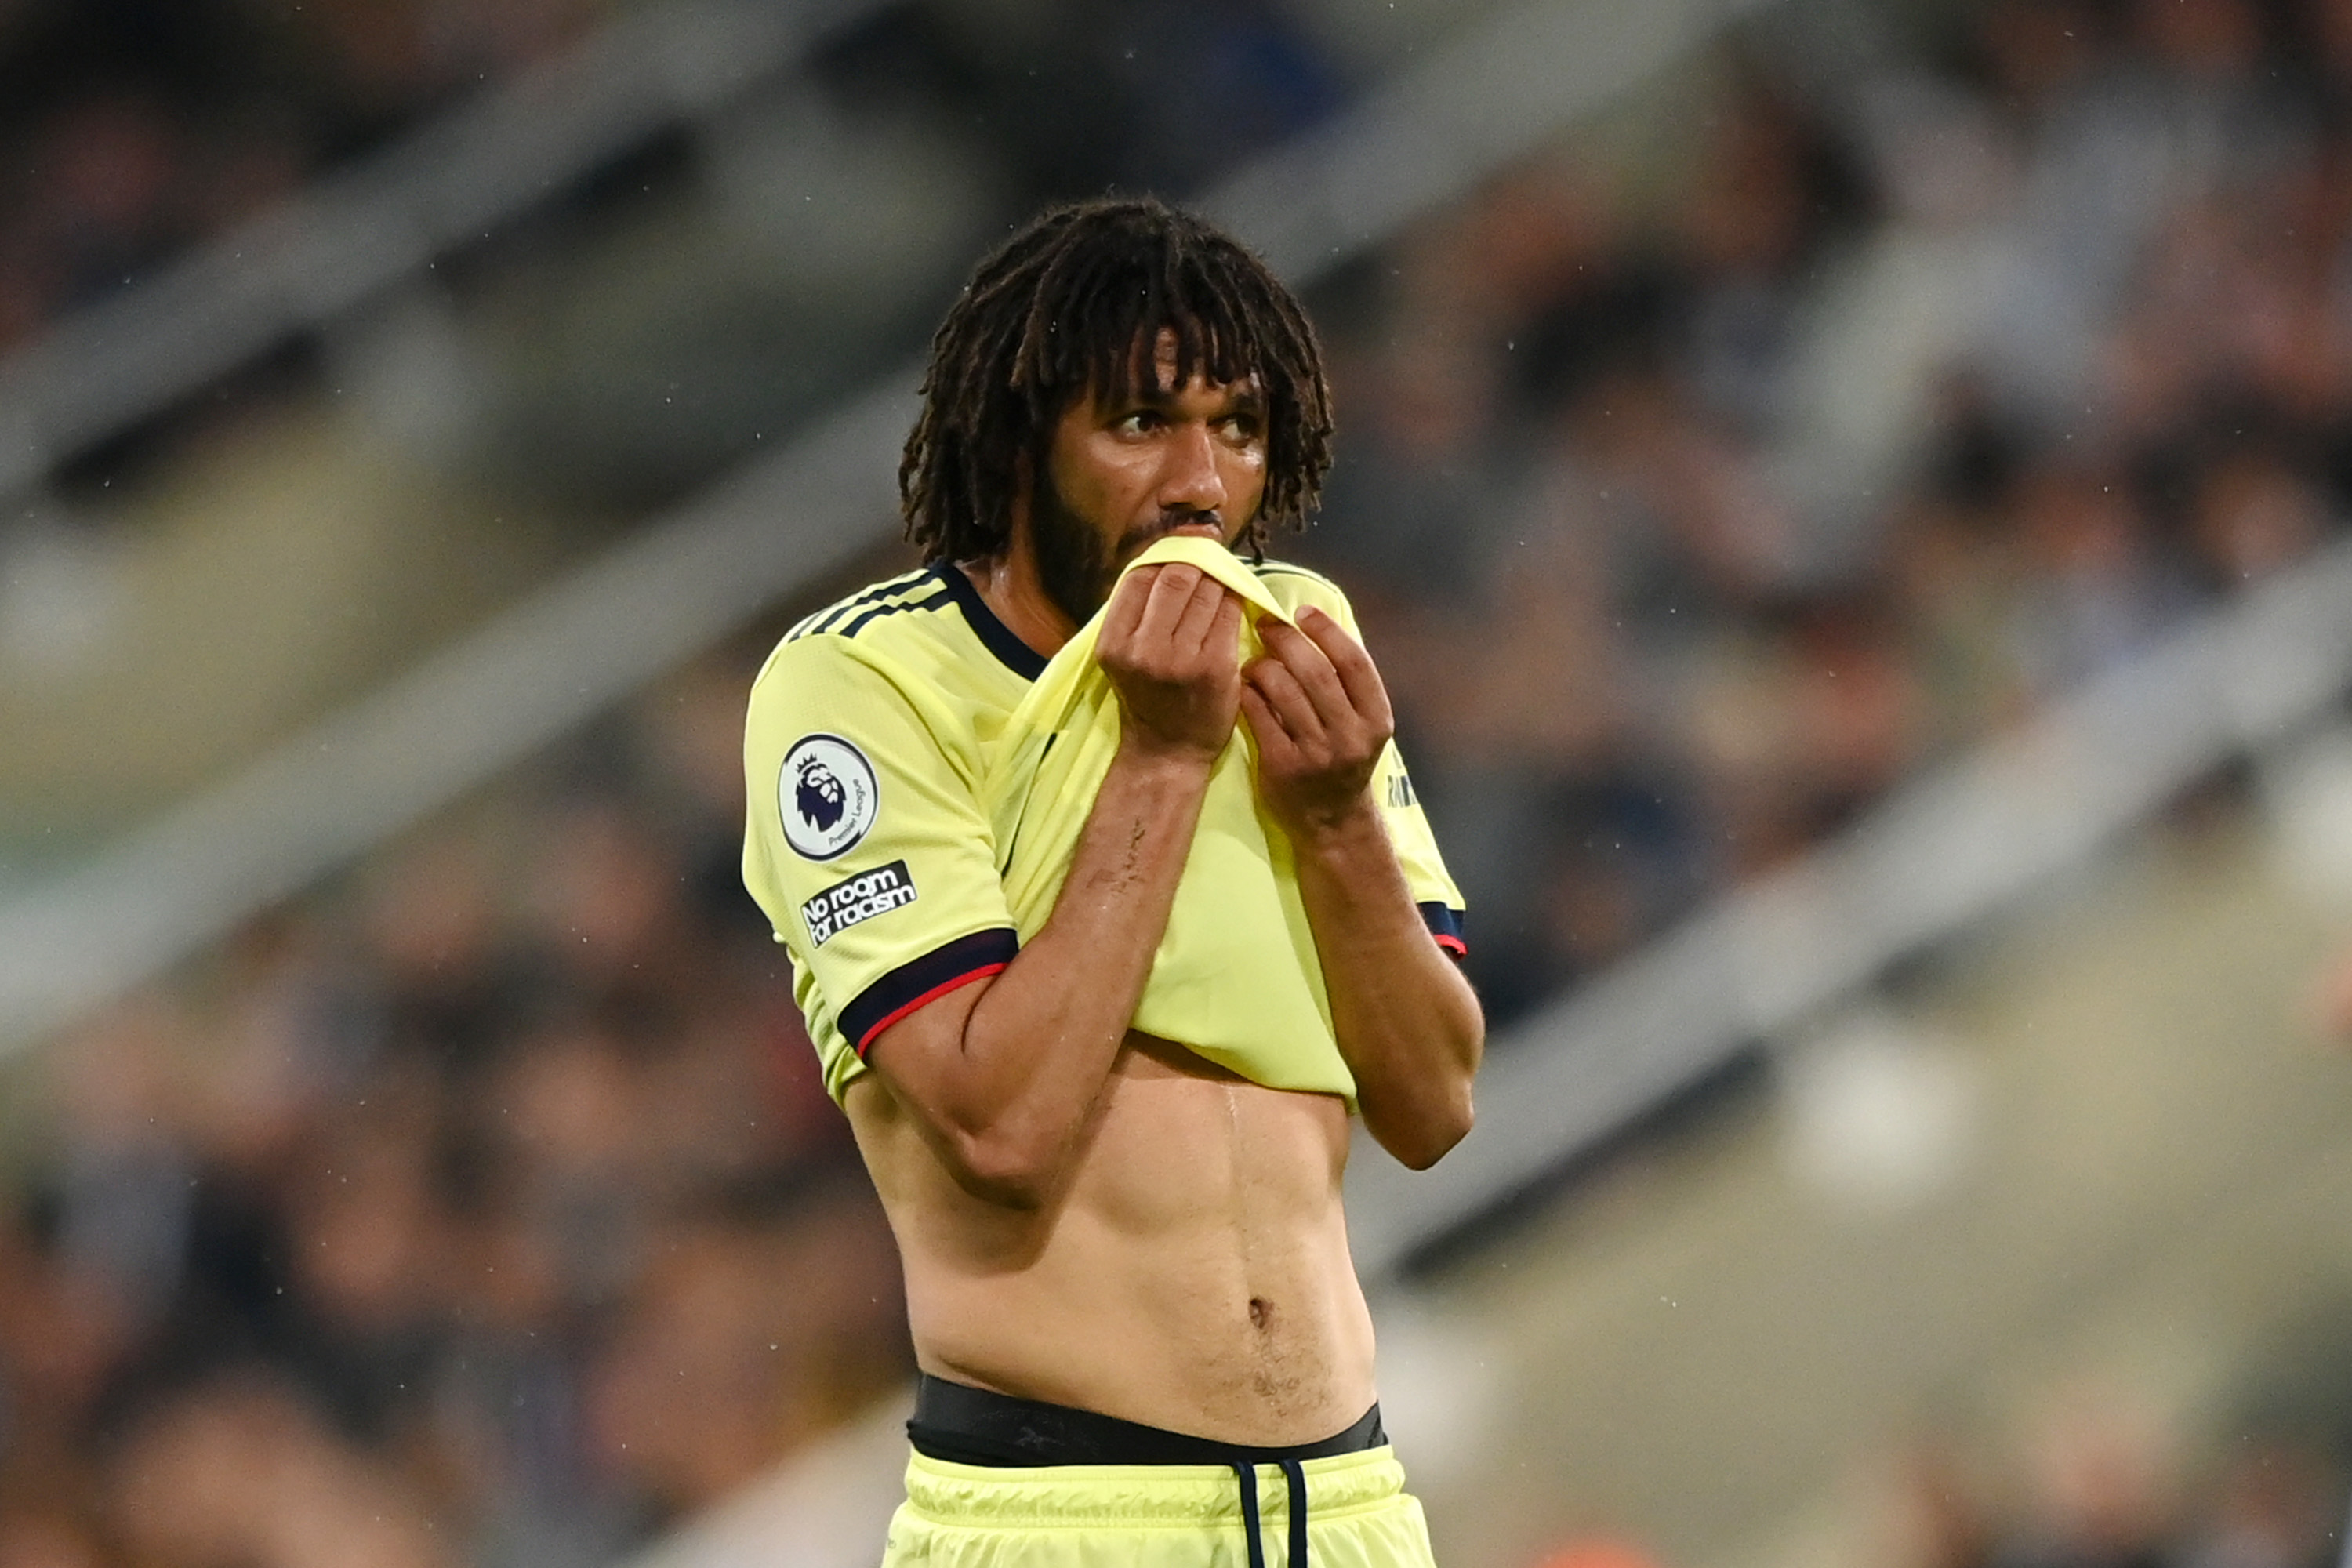 Mo Elneny cruelly knocked out of AFCON after Egypt lose on penalties